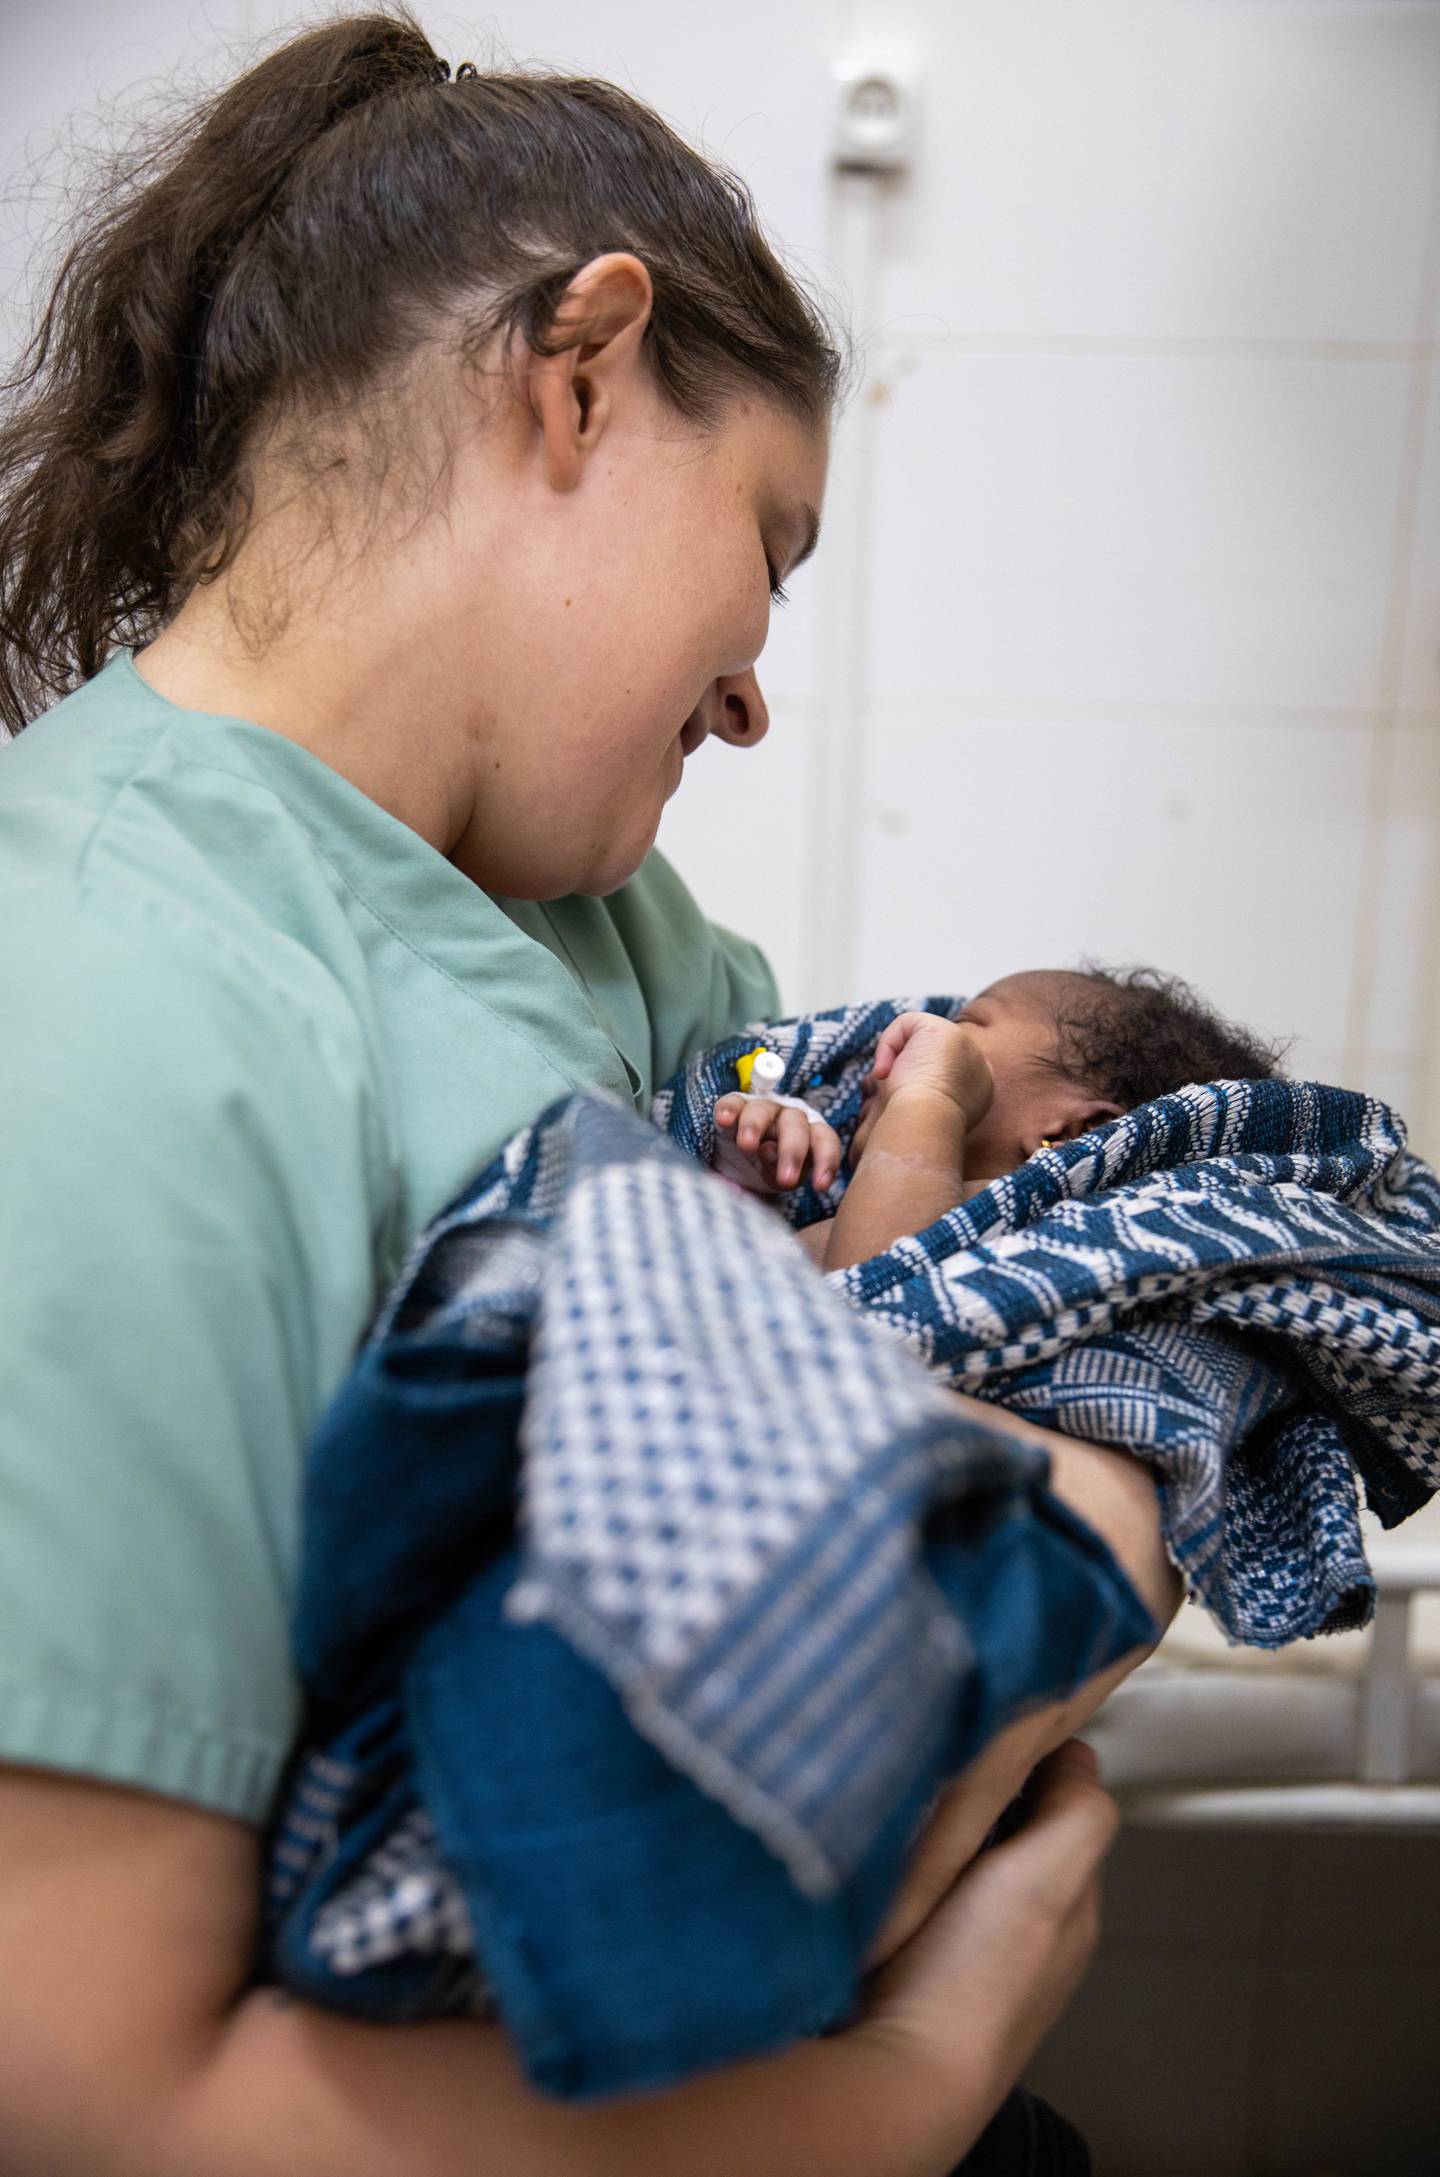 Army Staff Sgt. Christina Fontaine, a doula with the Vermont National Guard, soothes a days-old newborn in February during a medical readiness exercise in Senegal.